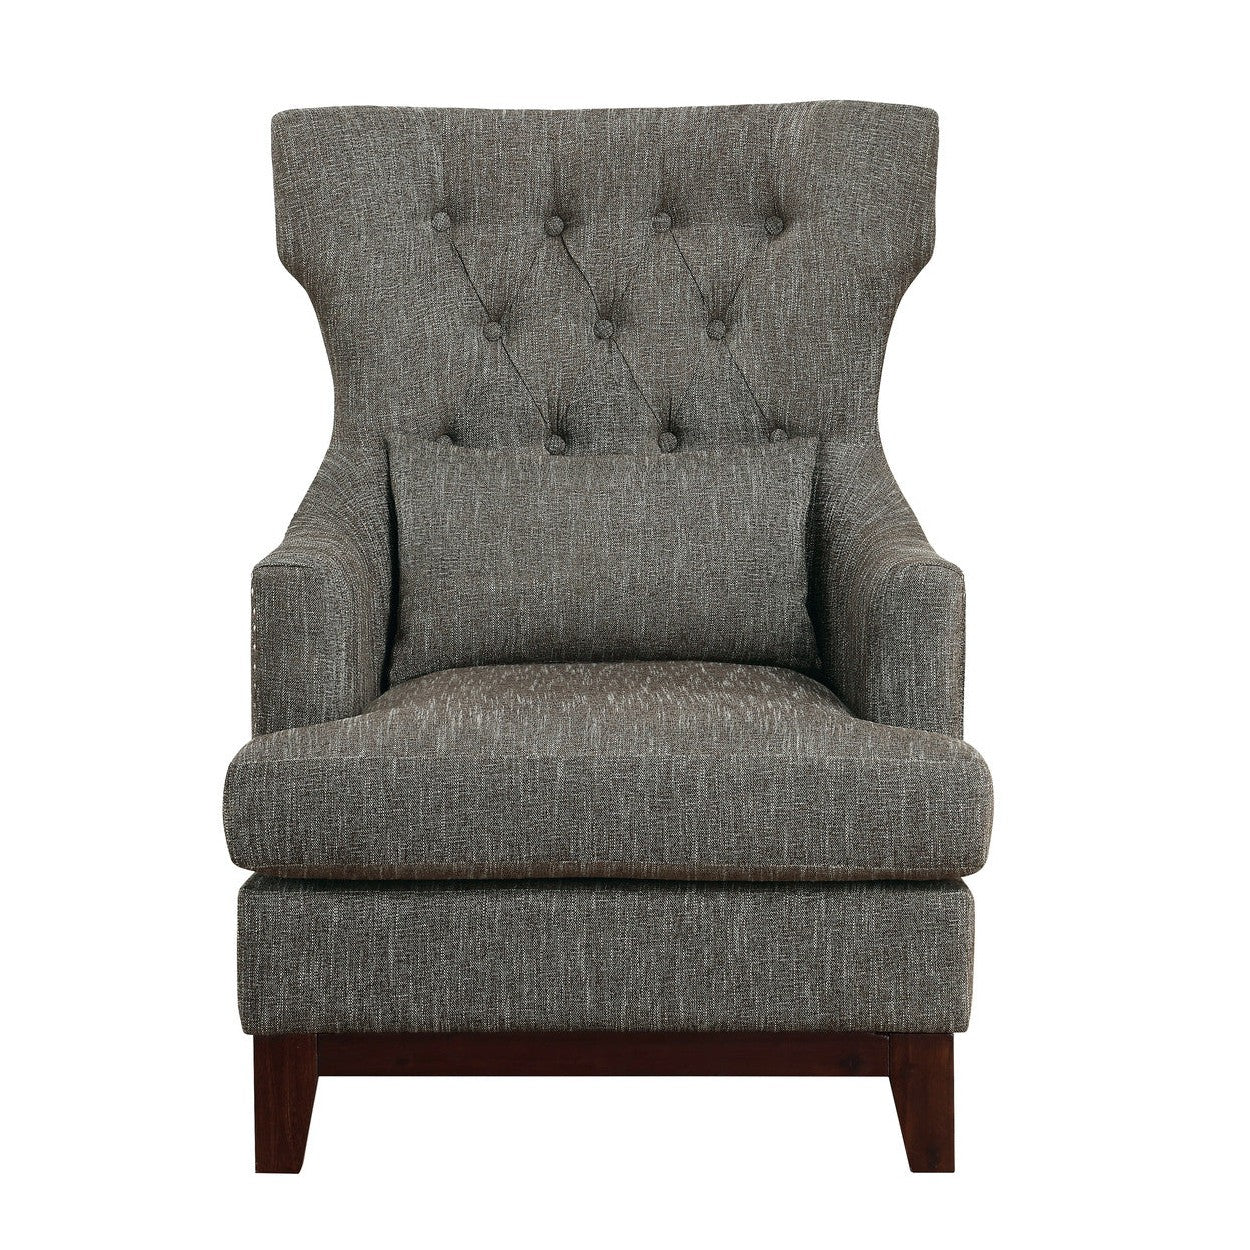 ACCENT CHAIR W/ KIDNEY PILLOW 1217F3S